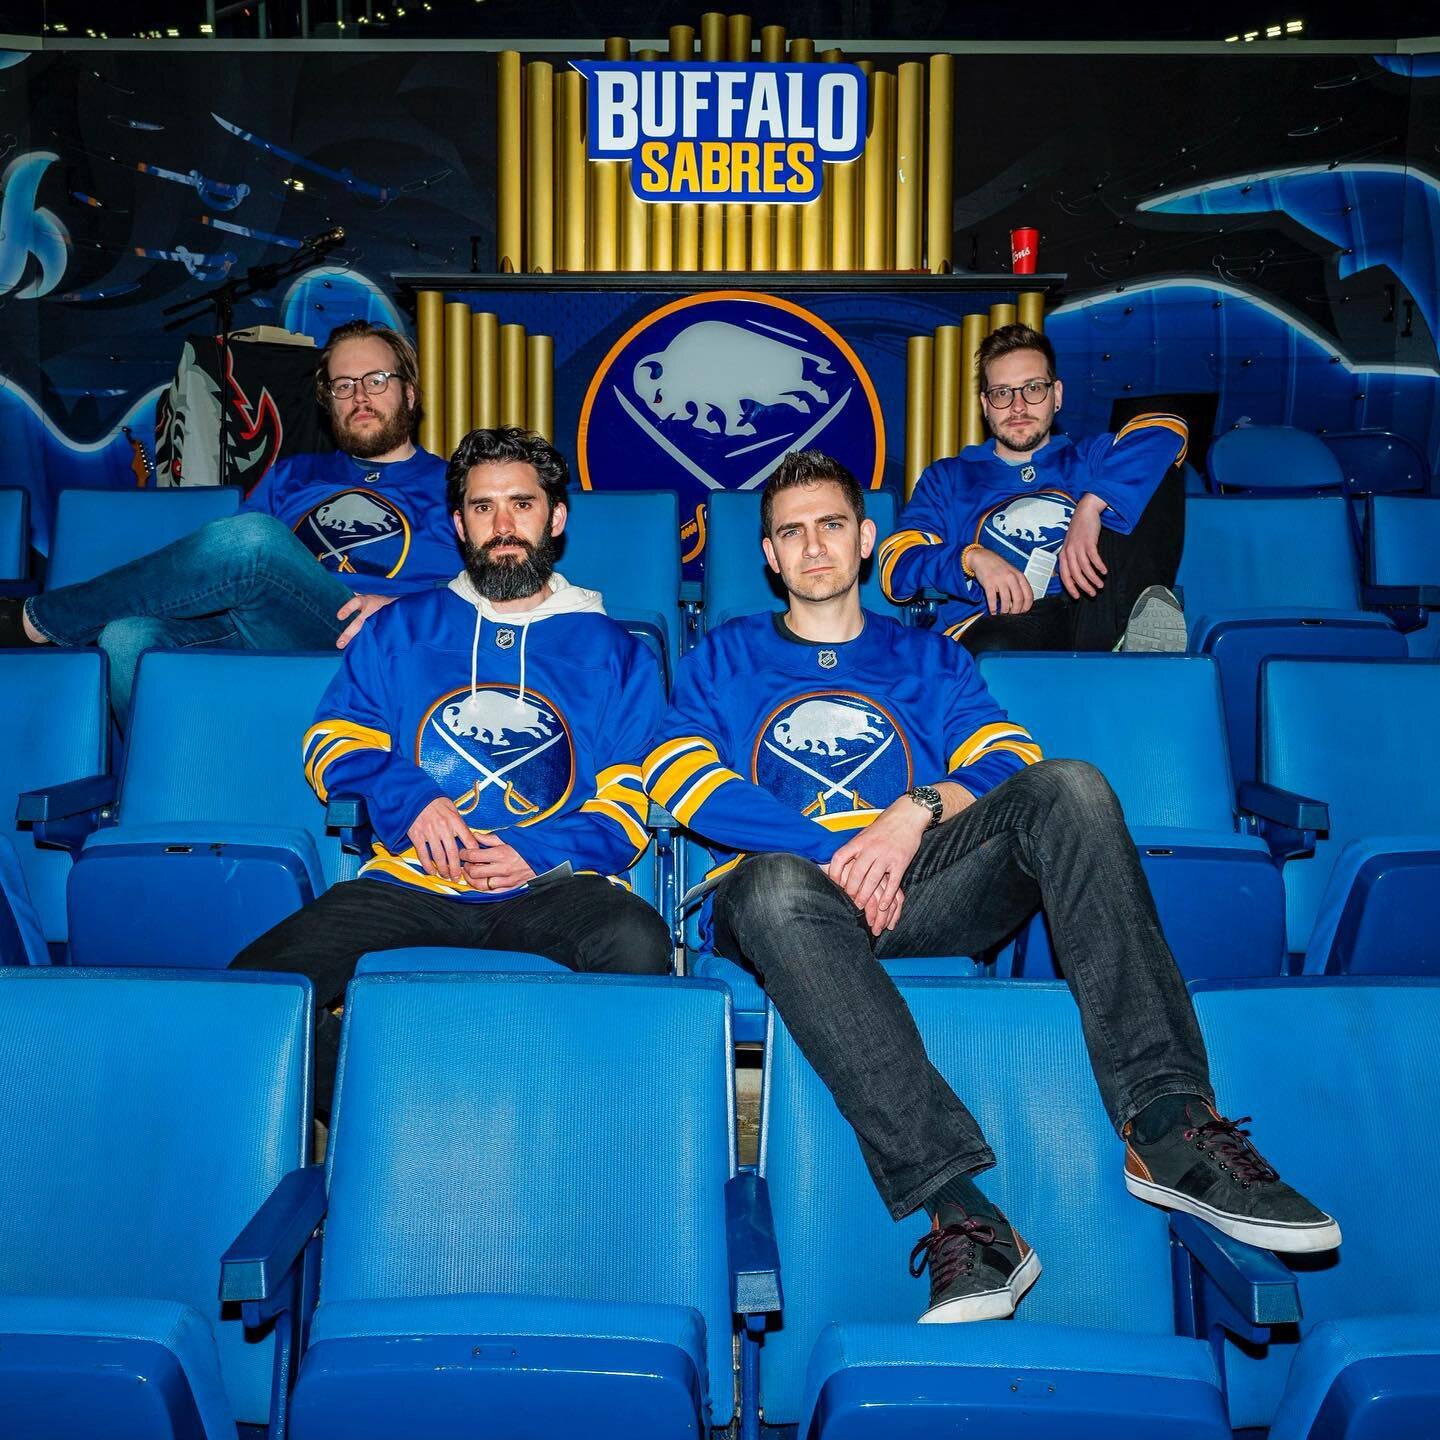 The @buffalosabres went 4-0 when The Plagiarists played this season. What a run. Thanks everyone. #buffalosabres #buffalo #livemusic #coverband #partyintheusa